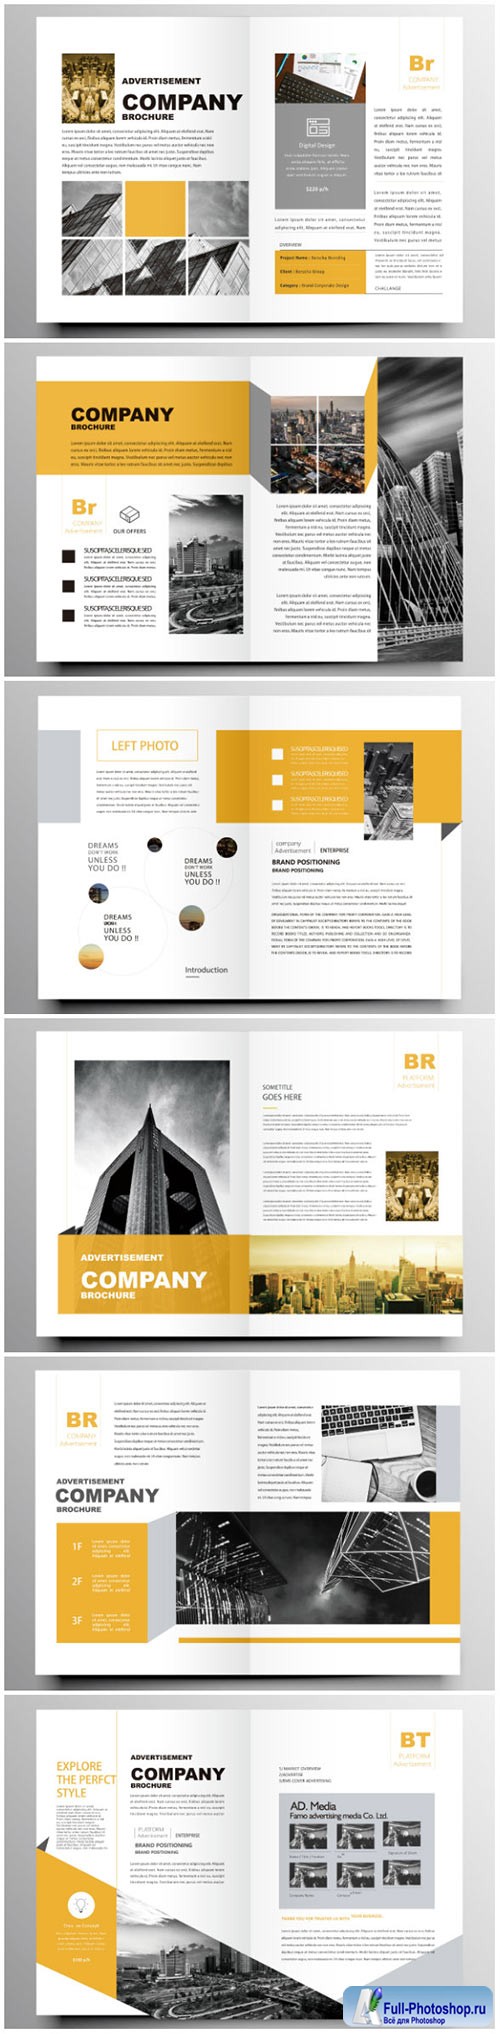 Brochure template vector layout design, corporate business annual report, magazine, flyer mockup # 198